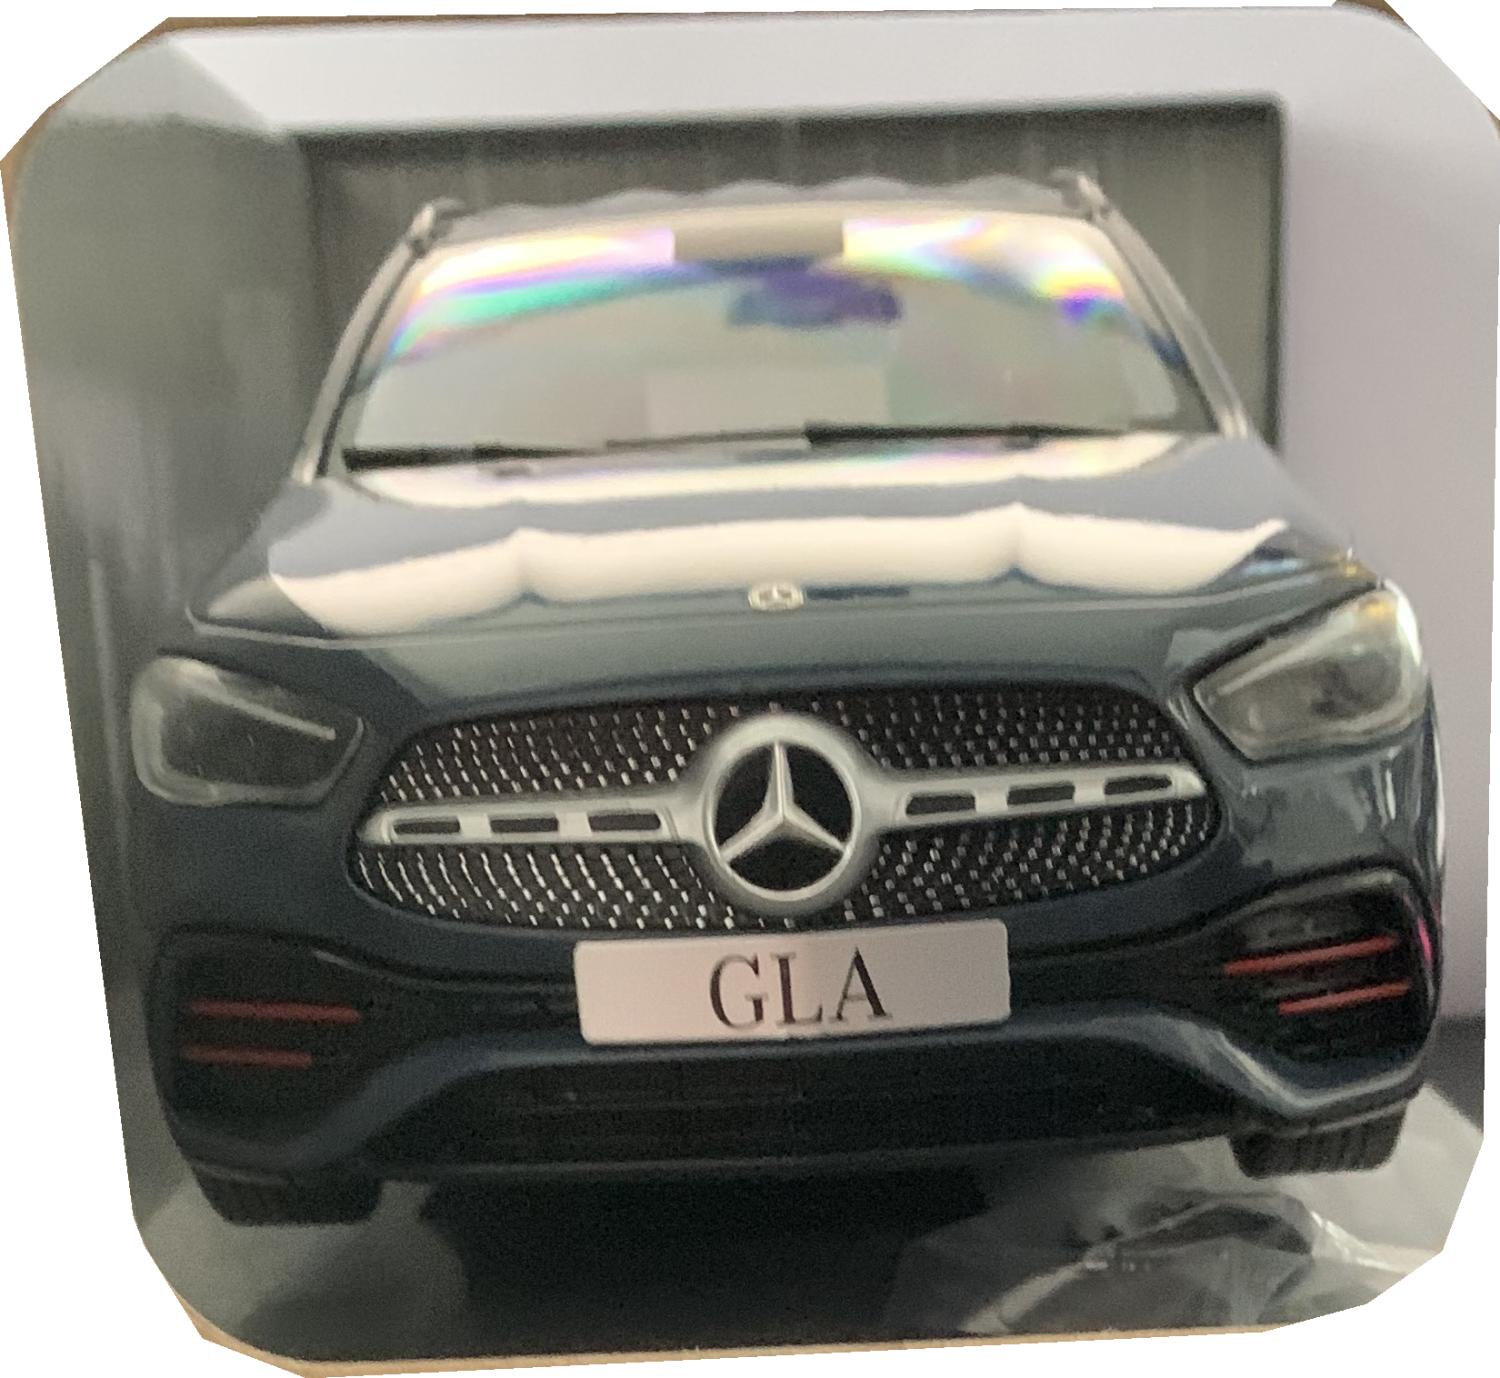 An excellent scale model of the Mercedes Benz GLA with high level of detail throughout, all authentically recreated.  Model is presented in a window display box